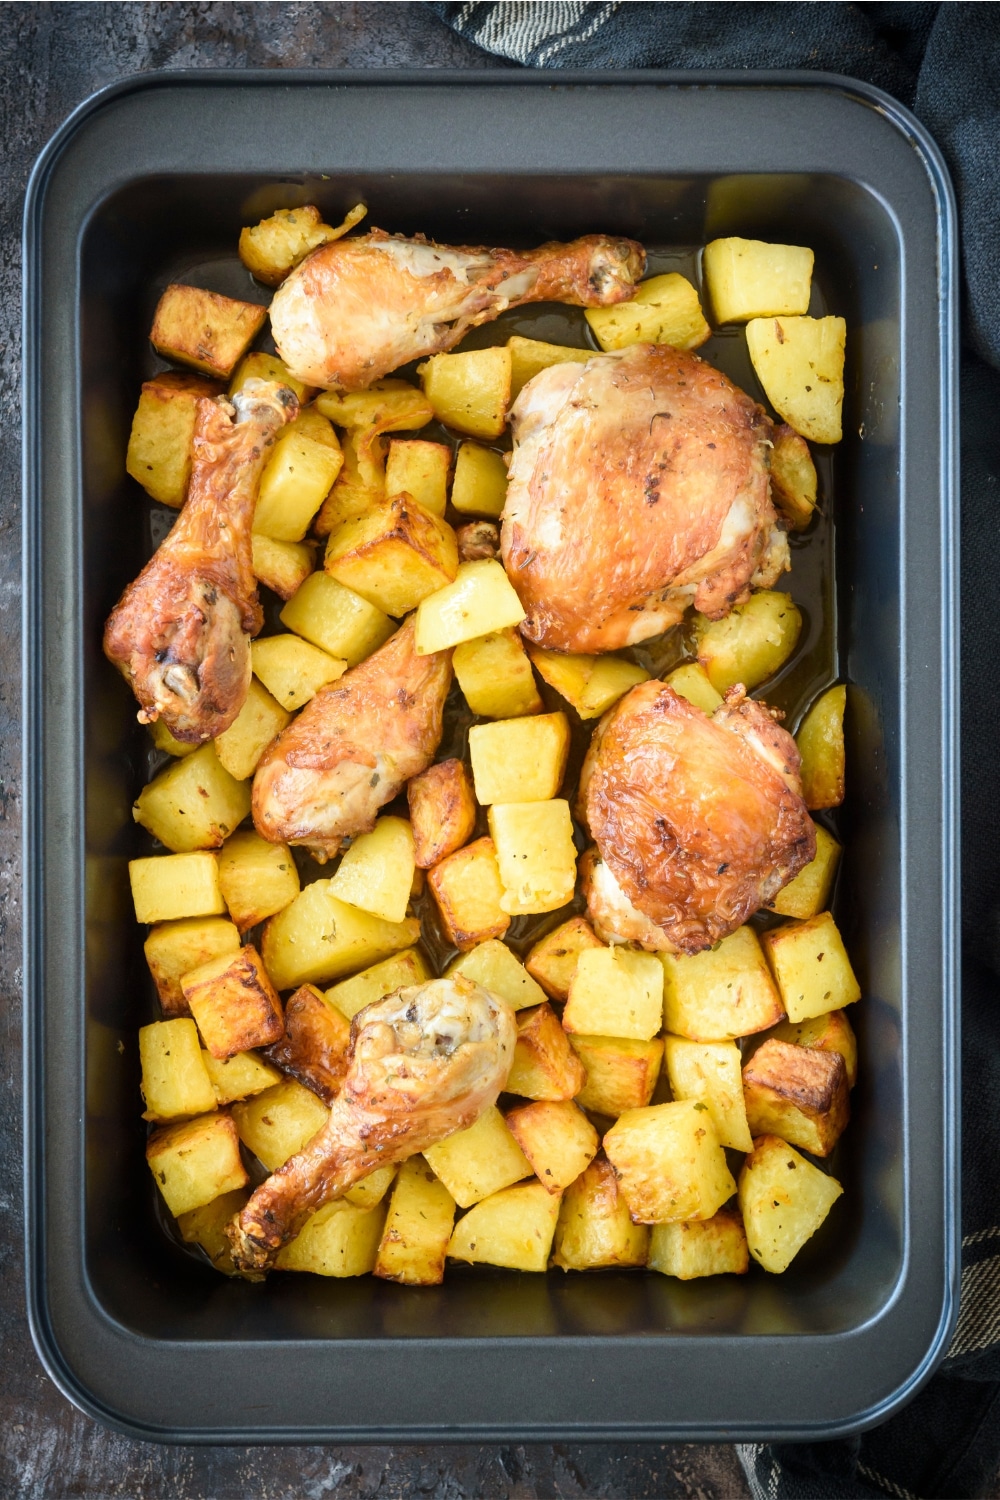 Chicken and potatoes in a black baking dish.